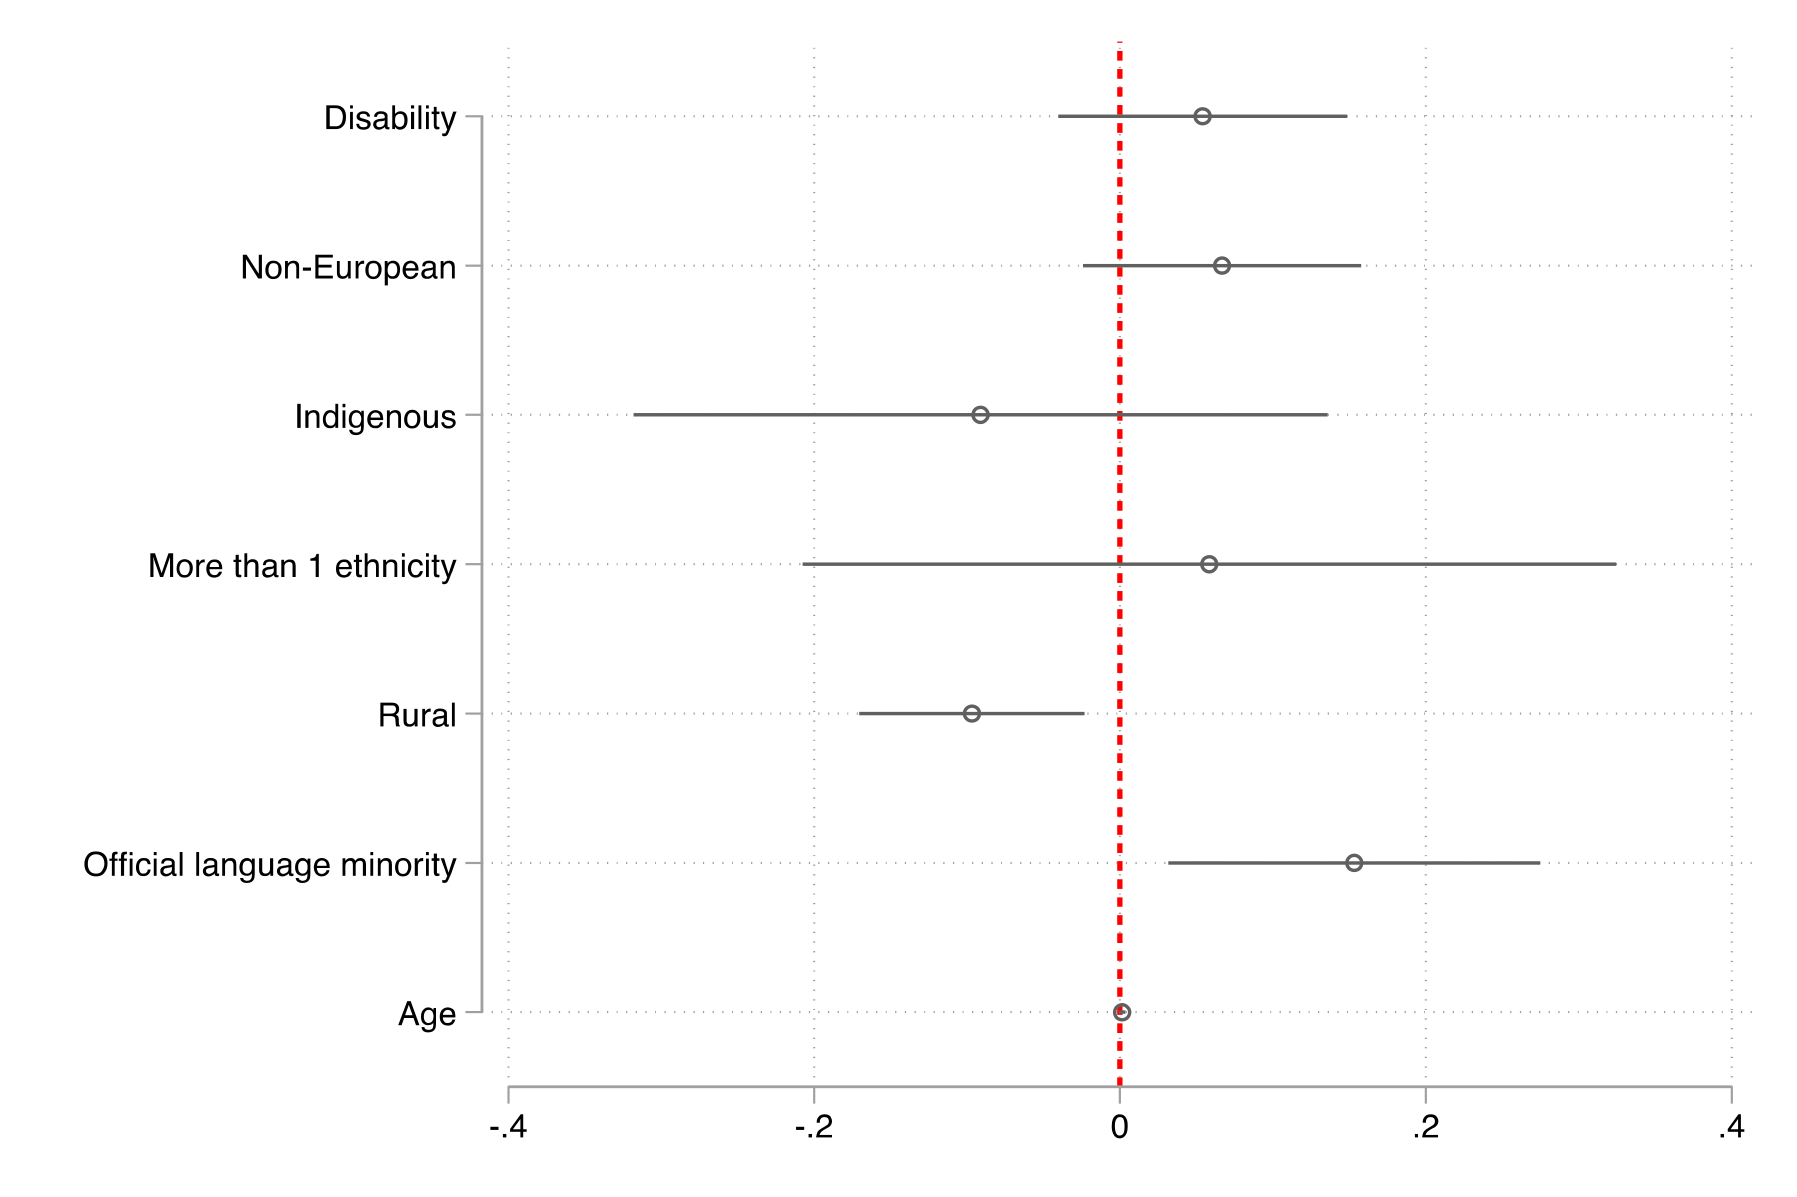 Figure 8. This figure shows the correlation between debate viewership and various socio-demographic groups.  It shows that individuals living in rural areas were less likely to watch a debate than individuals living in urban areas and that official language minorities were more likely to watch a debate than individuals who are not official language minorities.